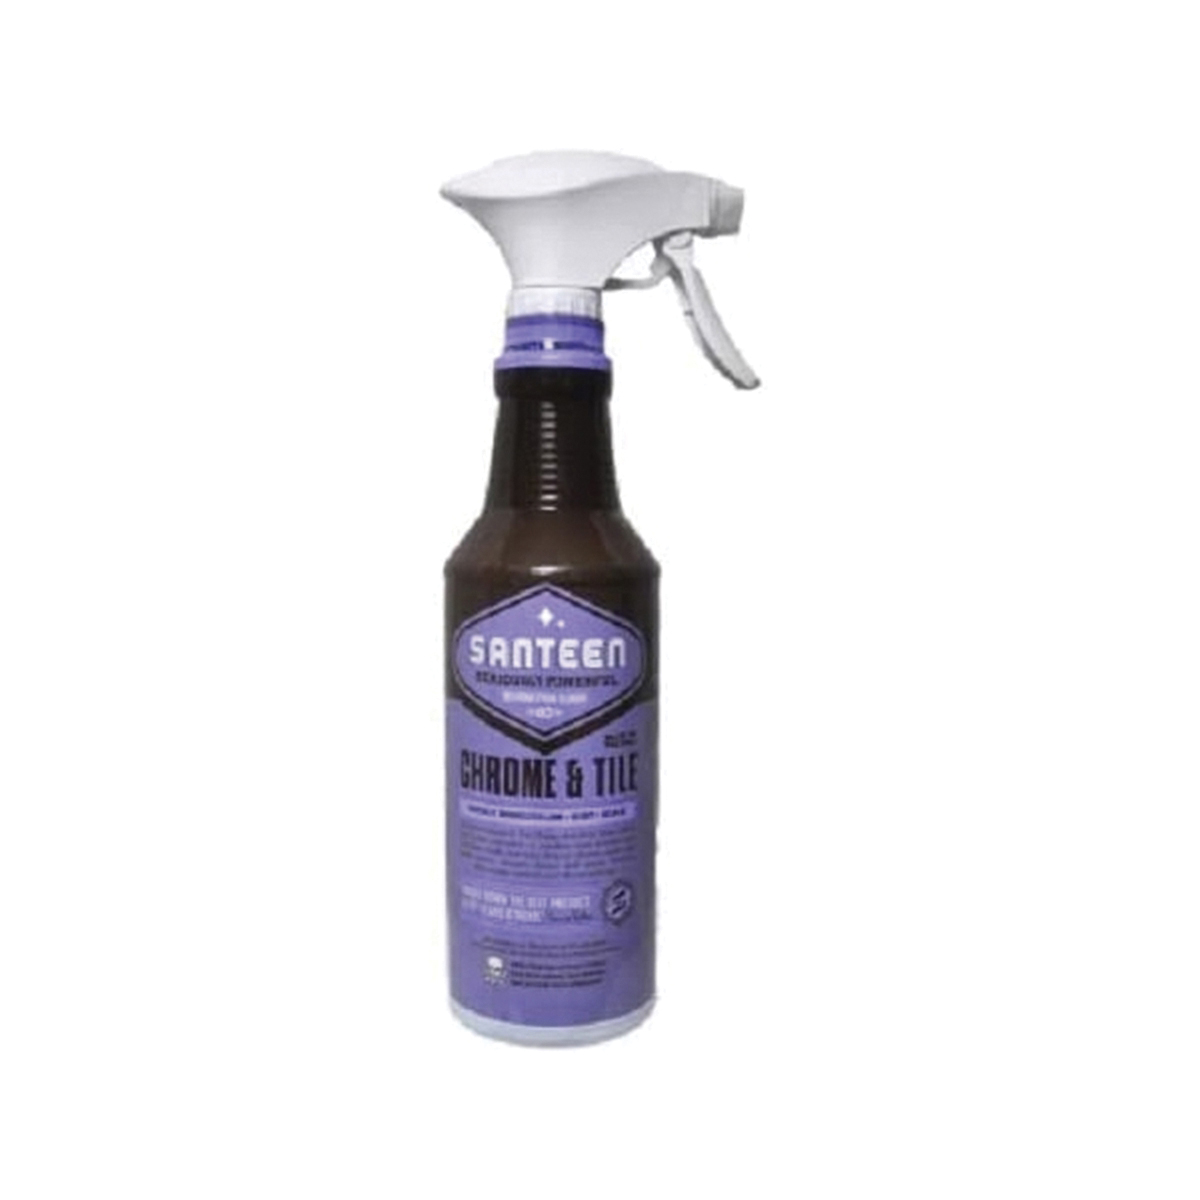 Santeen 700-6 Hair and Grease Clog Remover, 32 oz, Bottle 6 Pack  #VORG7409311, 700-6